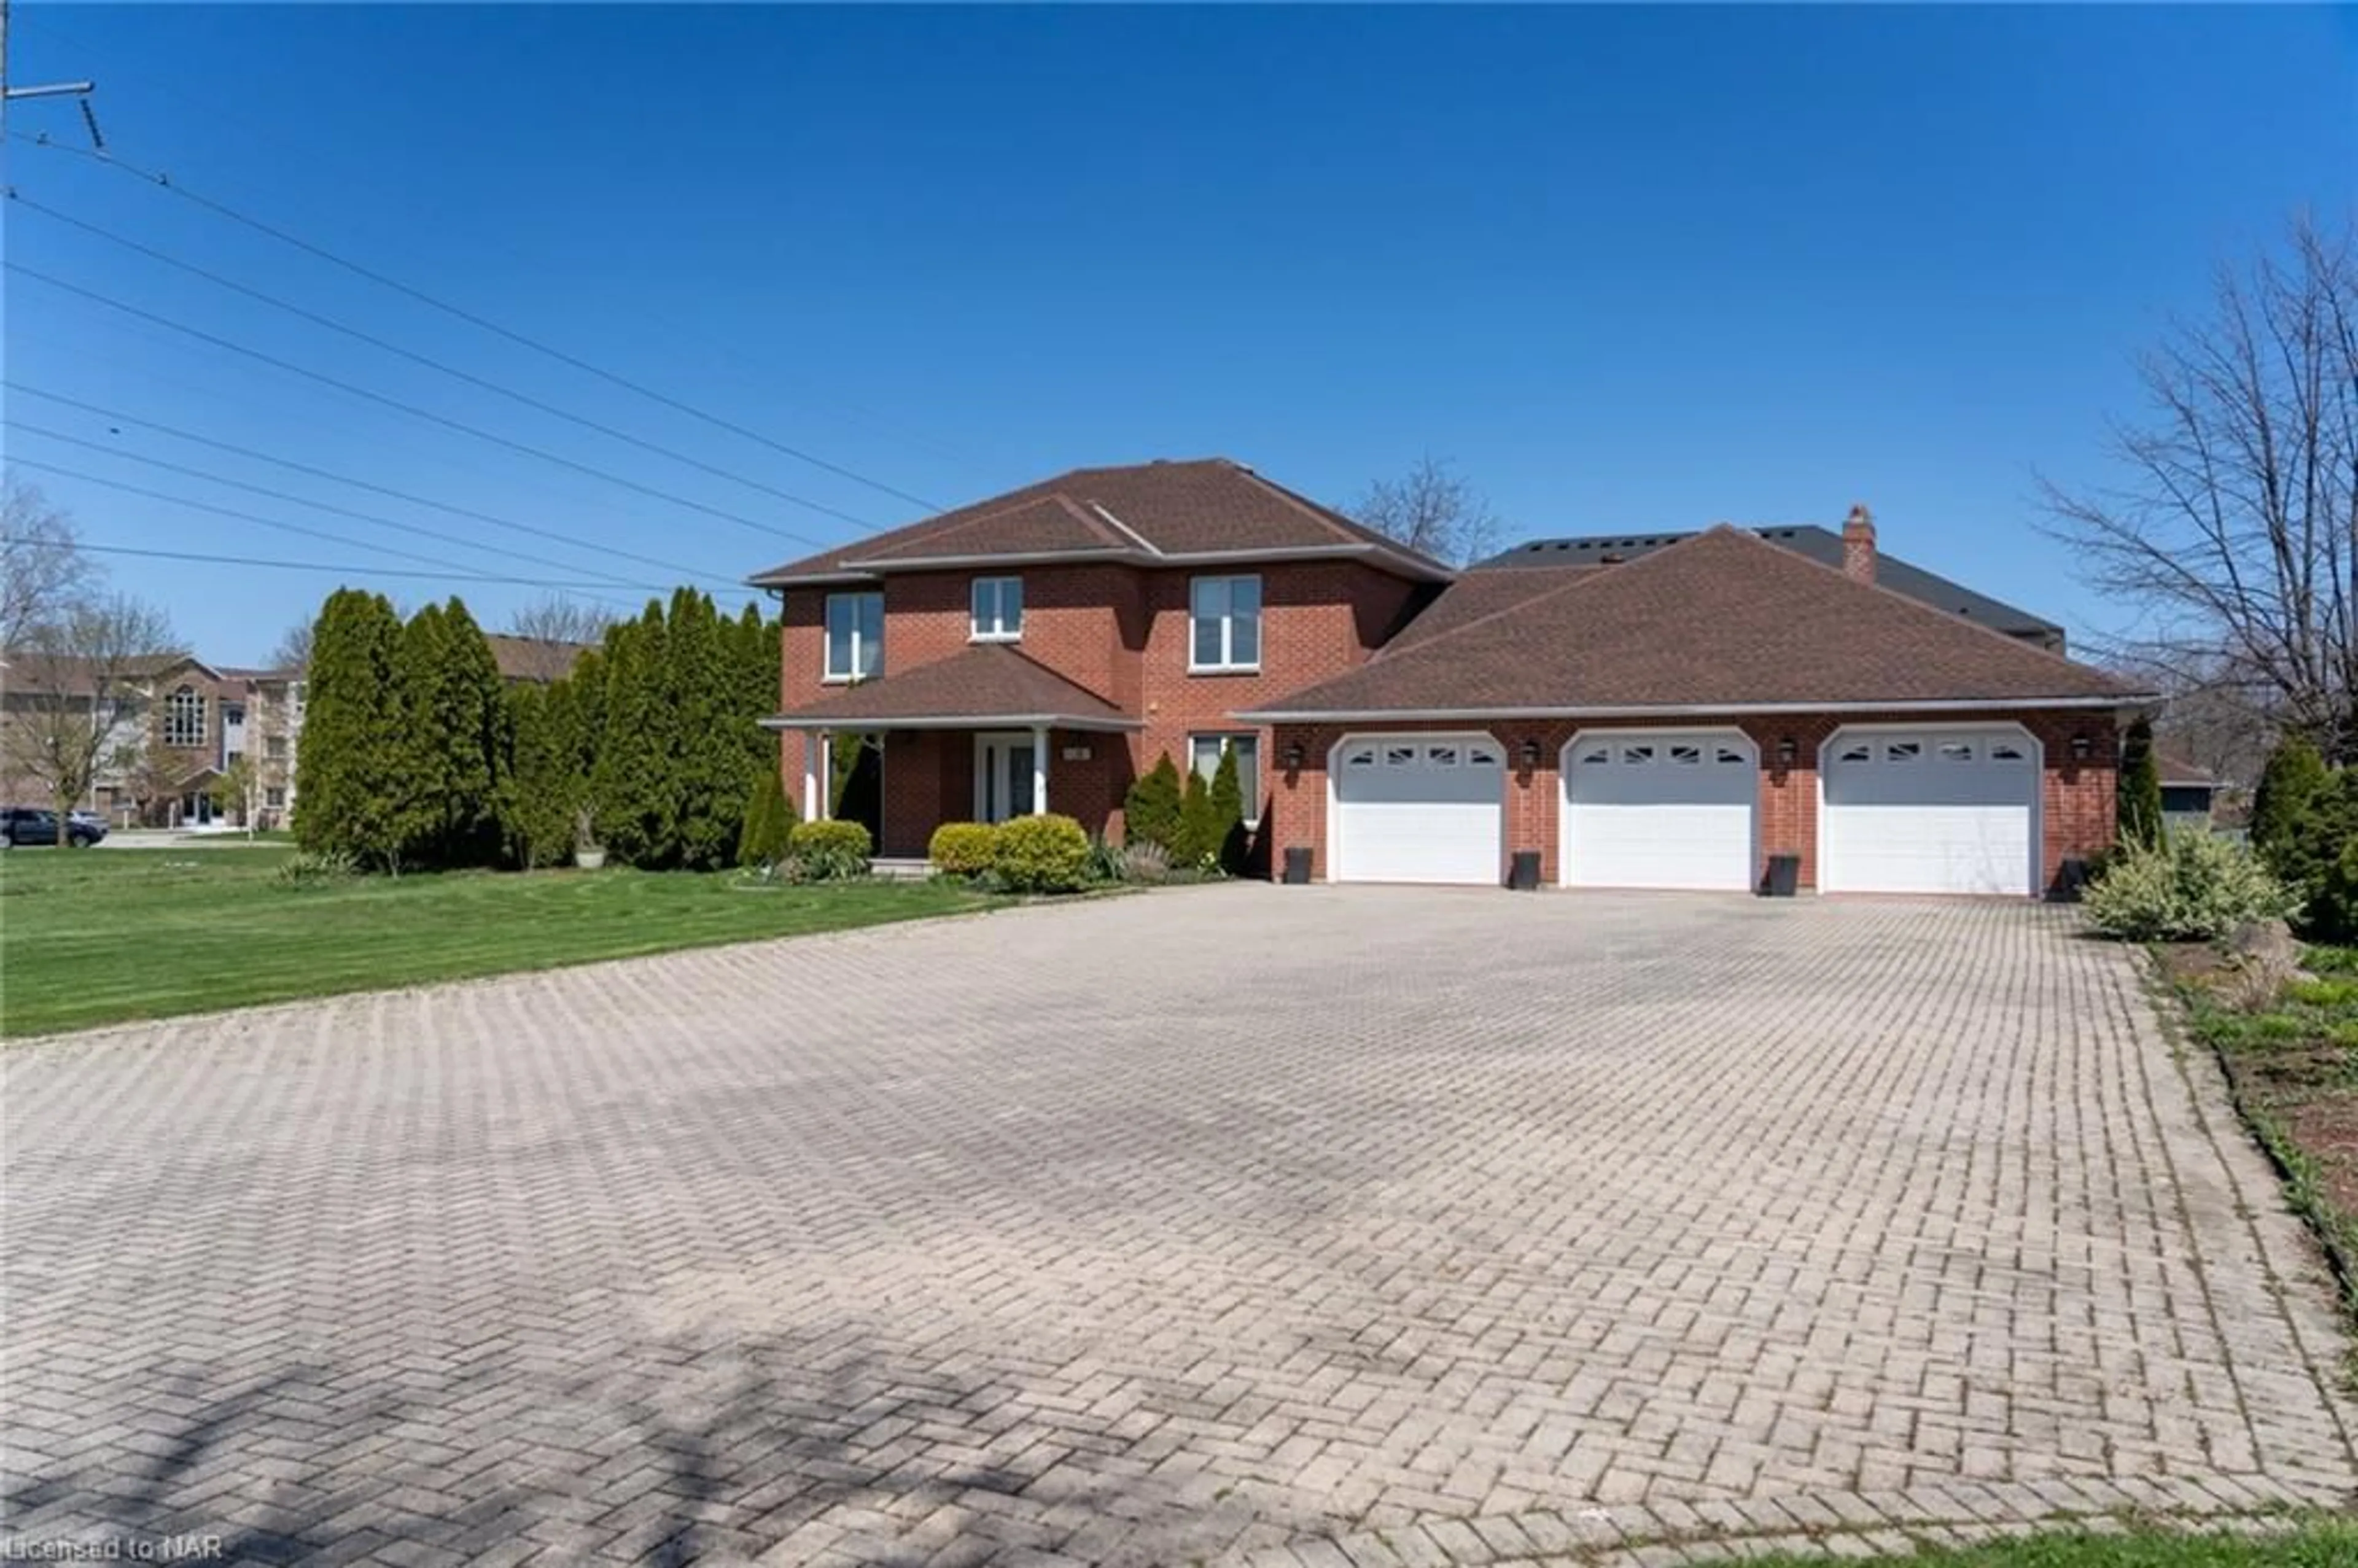 Home with brick exterior material for 1081 Vansickle Rd, St. Catharines Ontario L2S 2X4